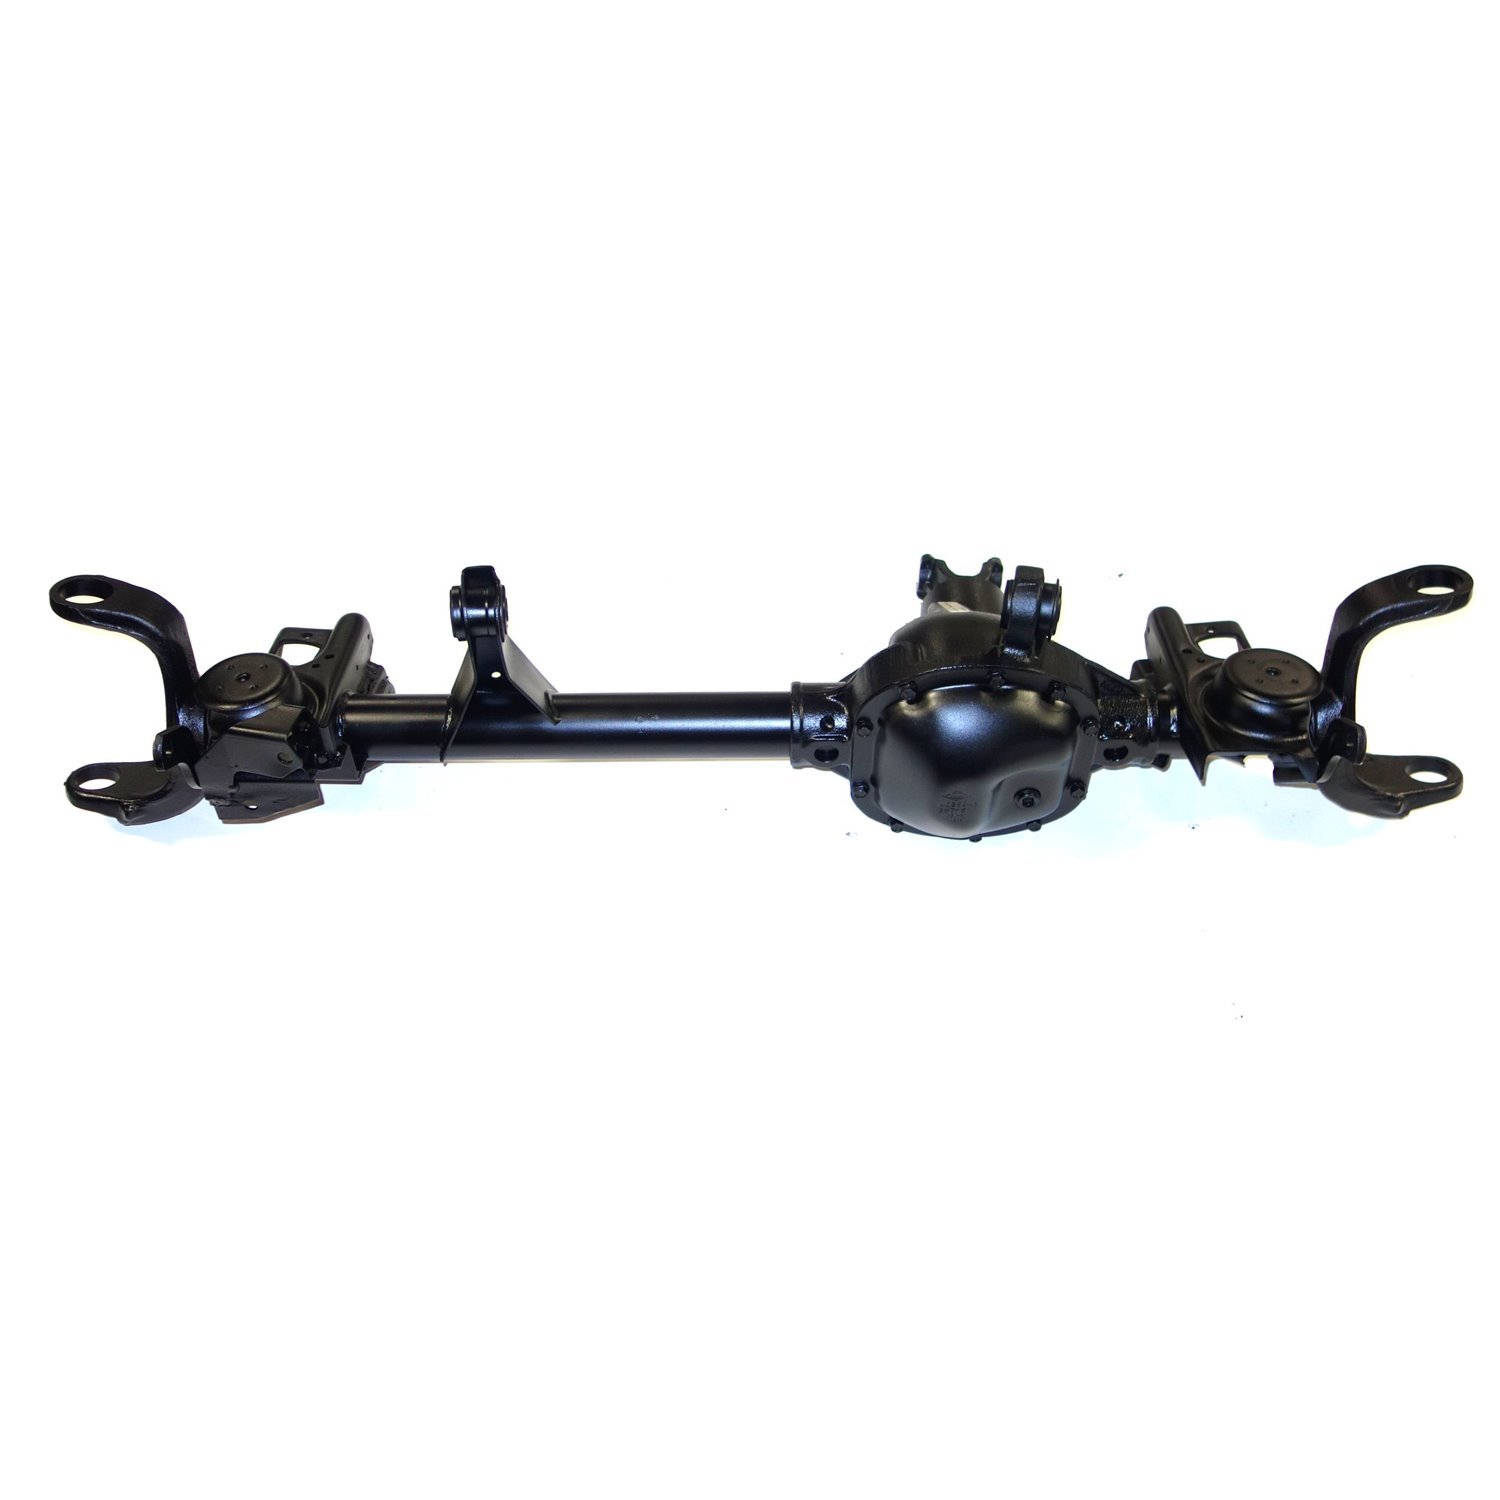 Remanufactured Complete Axle Assembly for Dana 30 94-99 Jeep Cherokee 3.55 Ratio with ABS